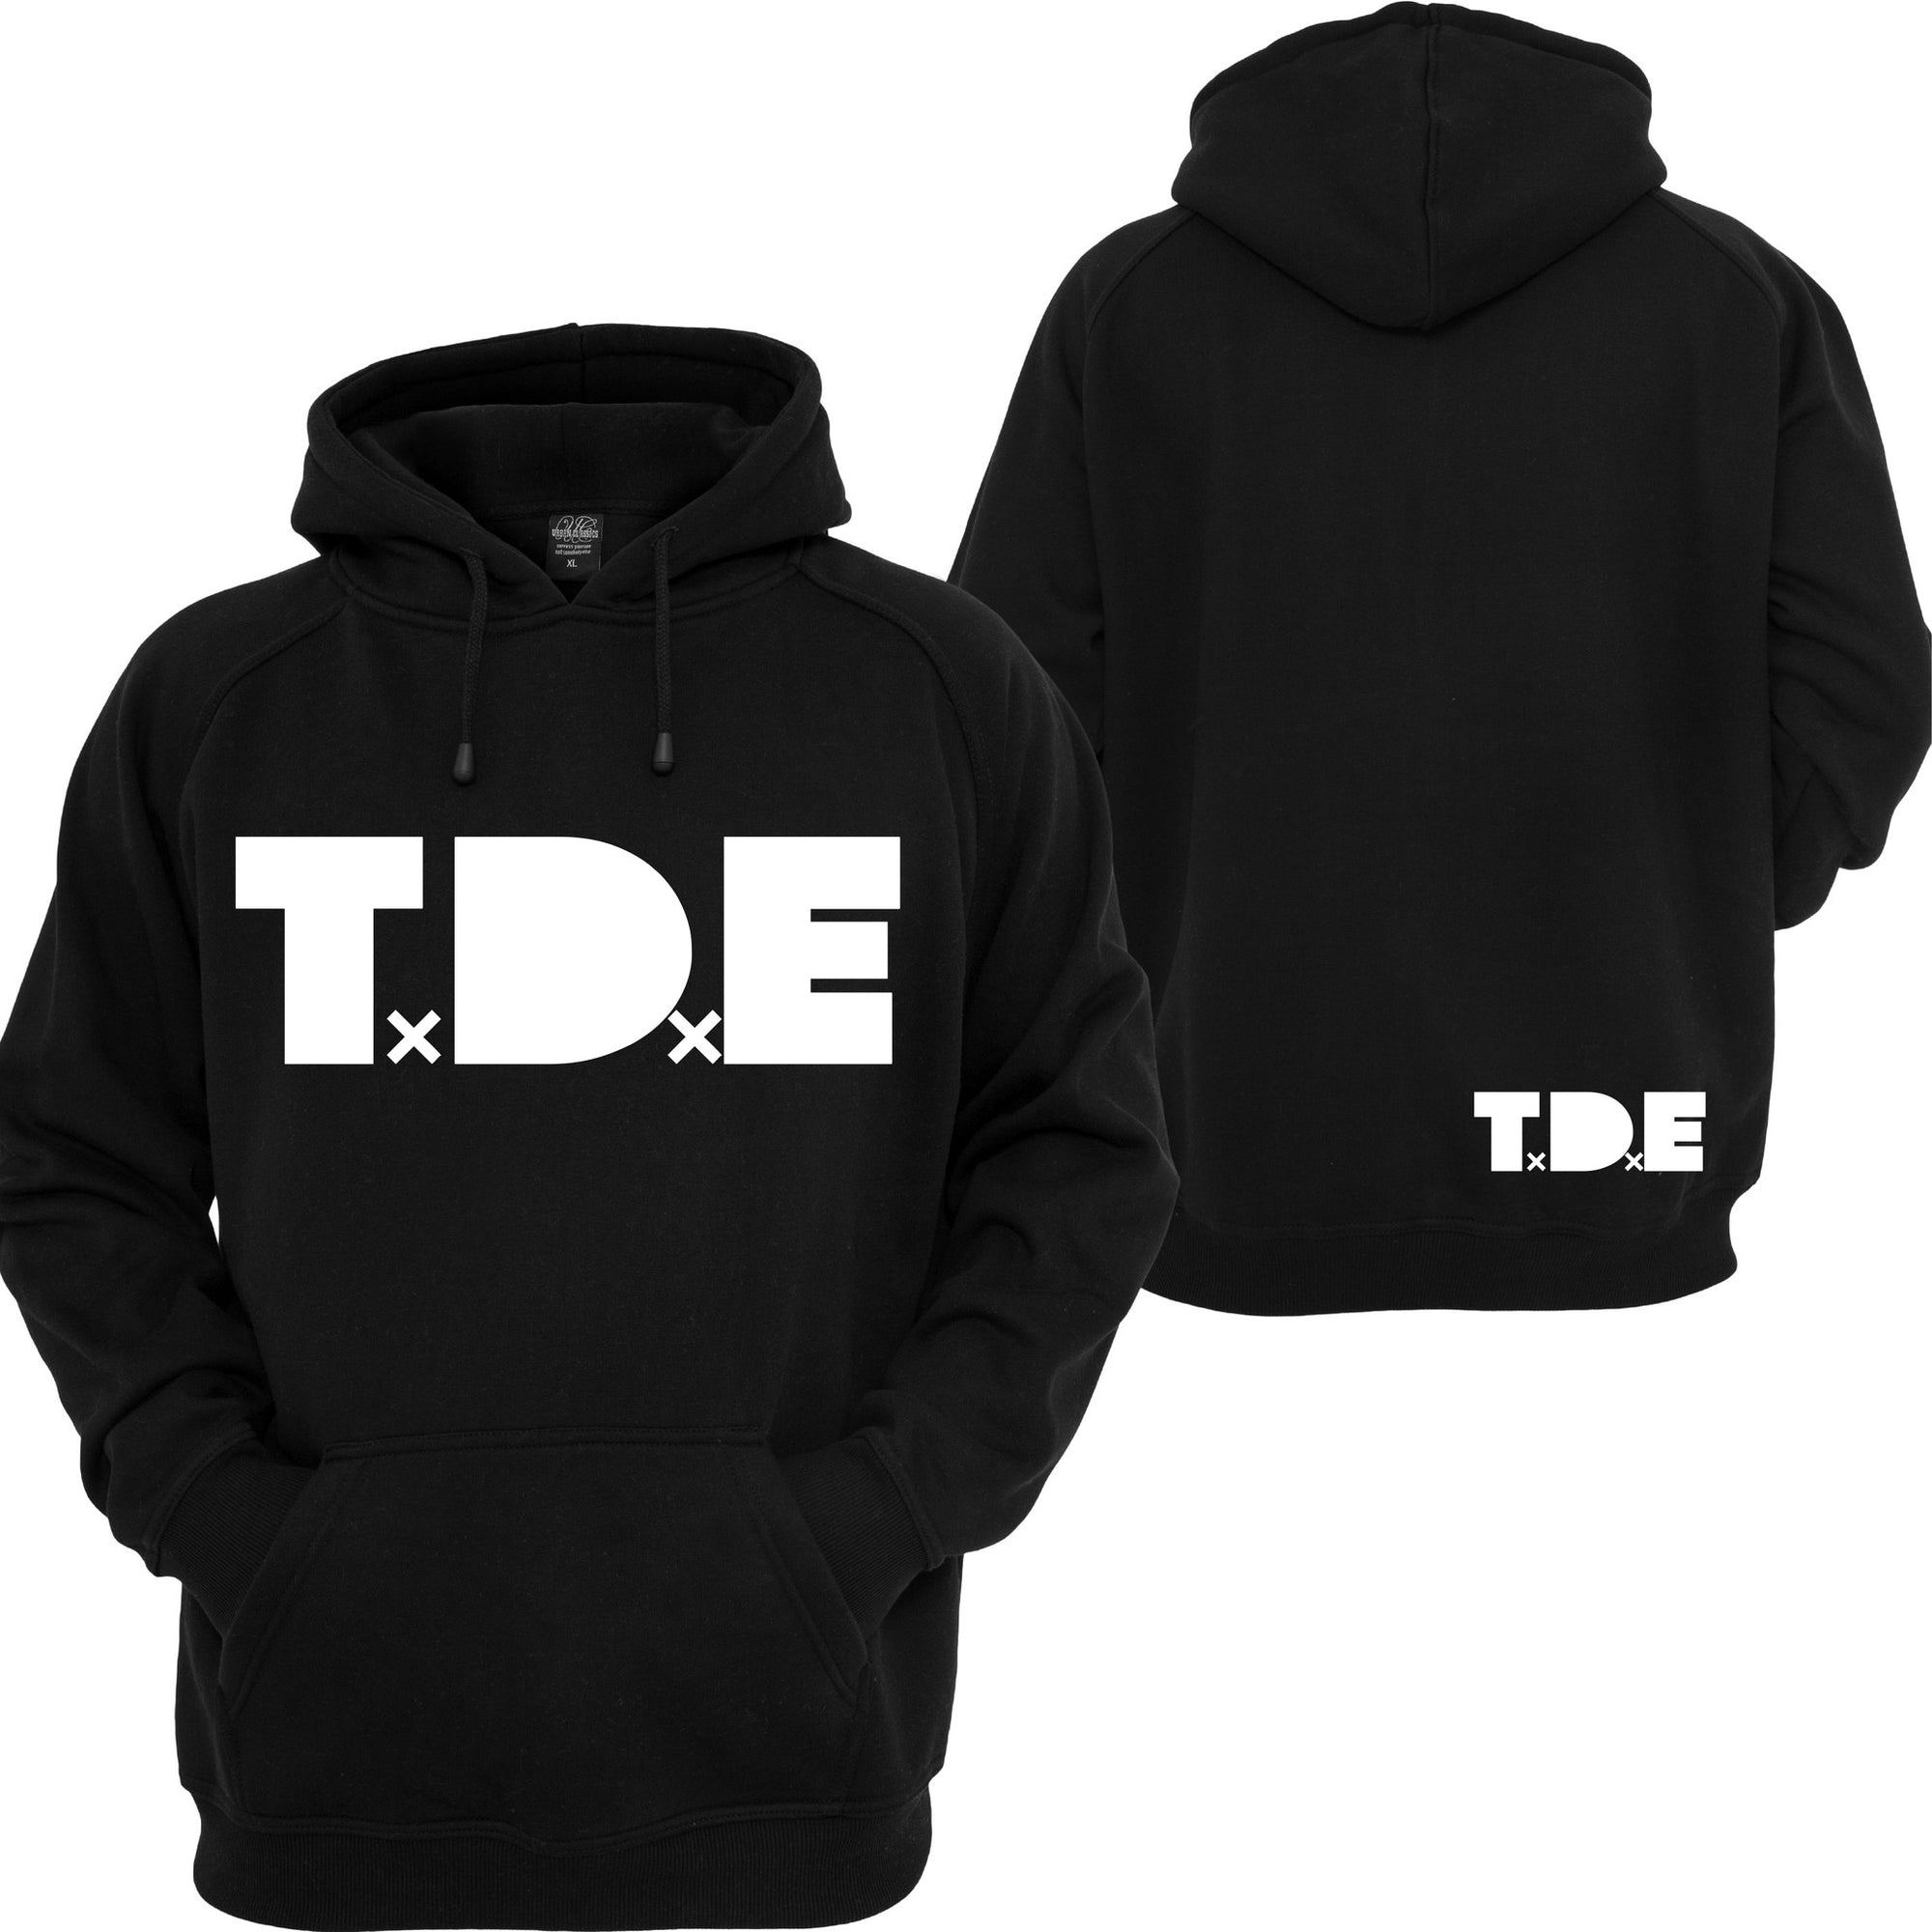 TDE J COLE Hoodie Top Dawg Entertainment Dreamville Records Music Kend – CustomTeezPdx2000 x 2000